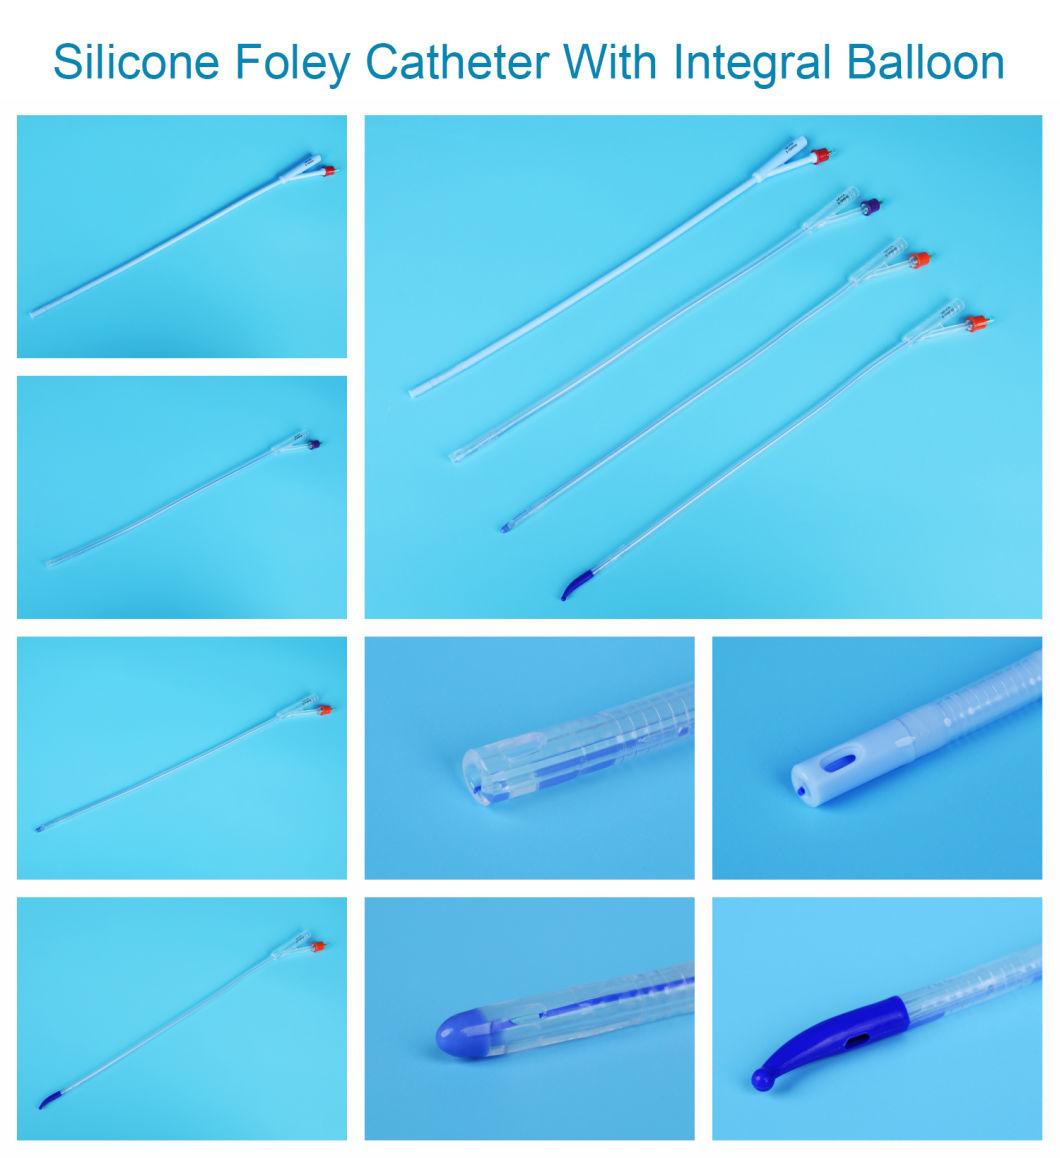 with Unibal Integral Balloon Technology 2 Way Silicone Foley Catheter Integrated Flat Balloon Tiemann Tipped Urethral Use Men